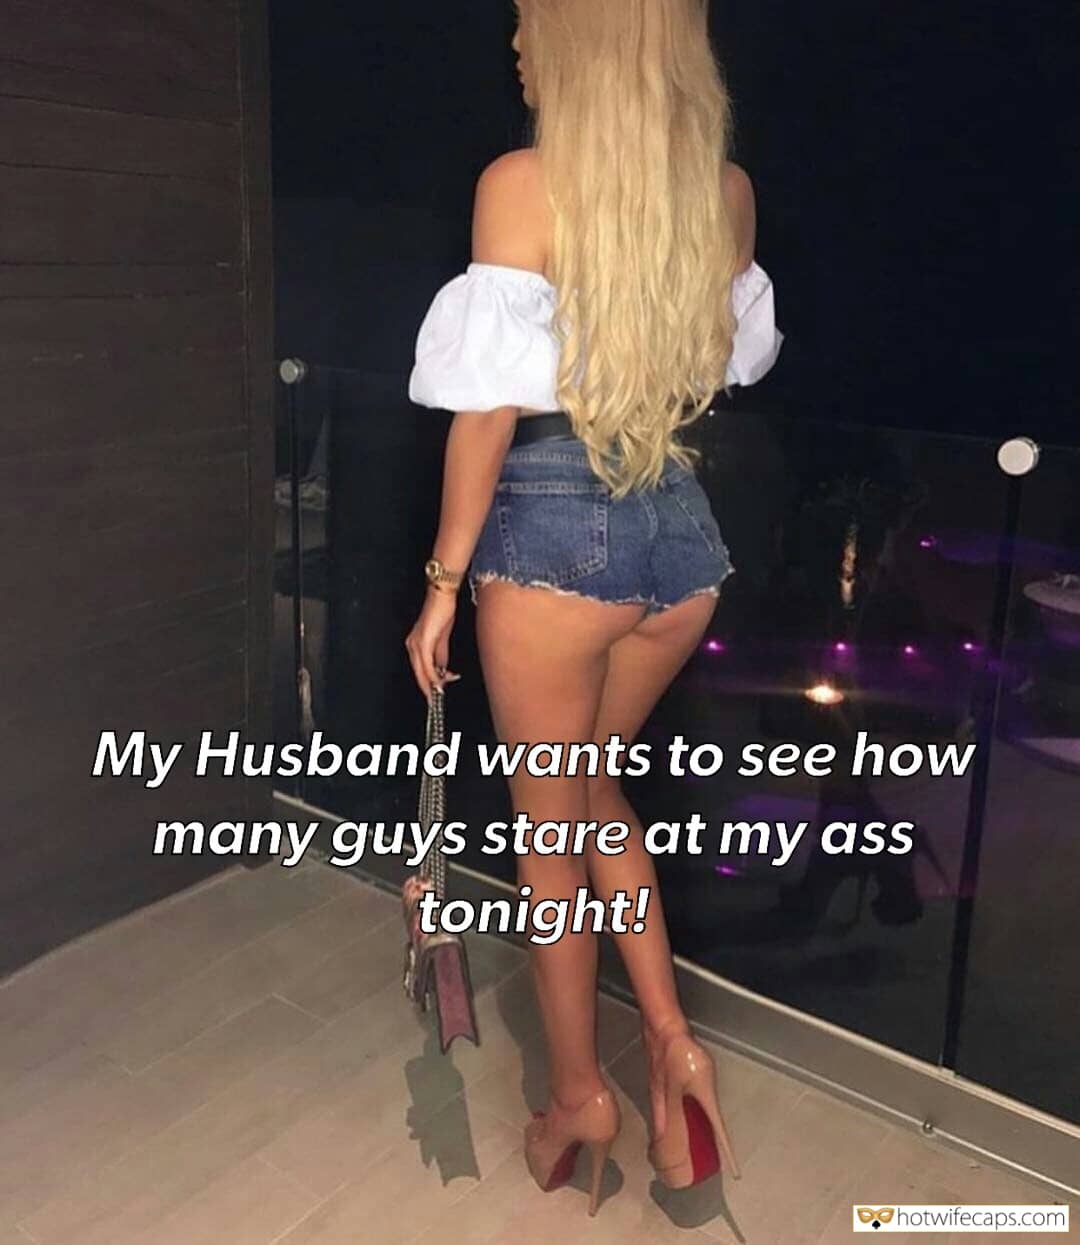 My Favorite hotwife caption: My Husband wants to see how many guys stare at my ass tonight! Allow Other Man to Grab Them Too